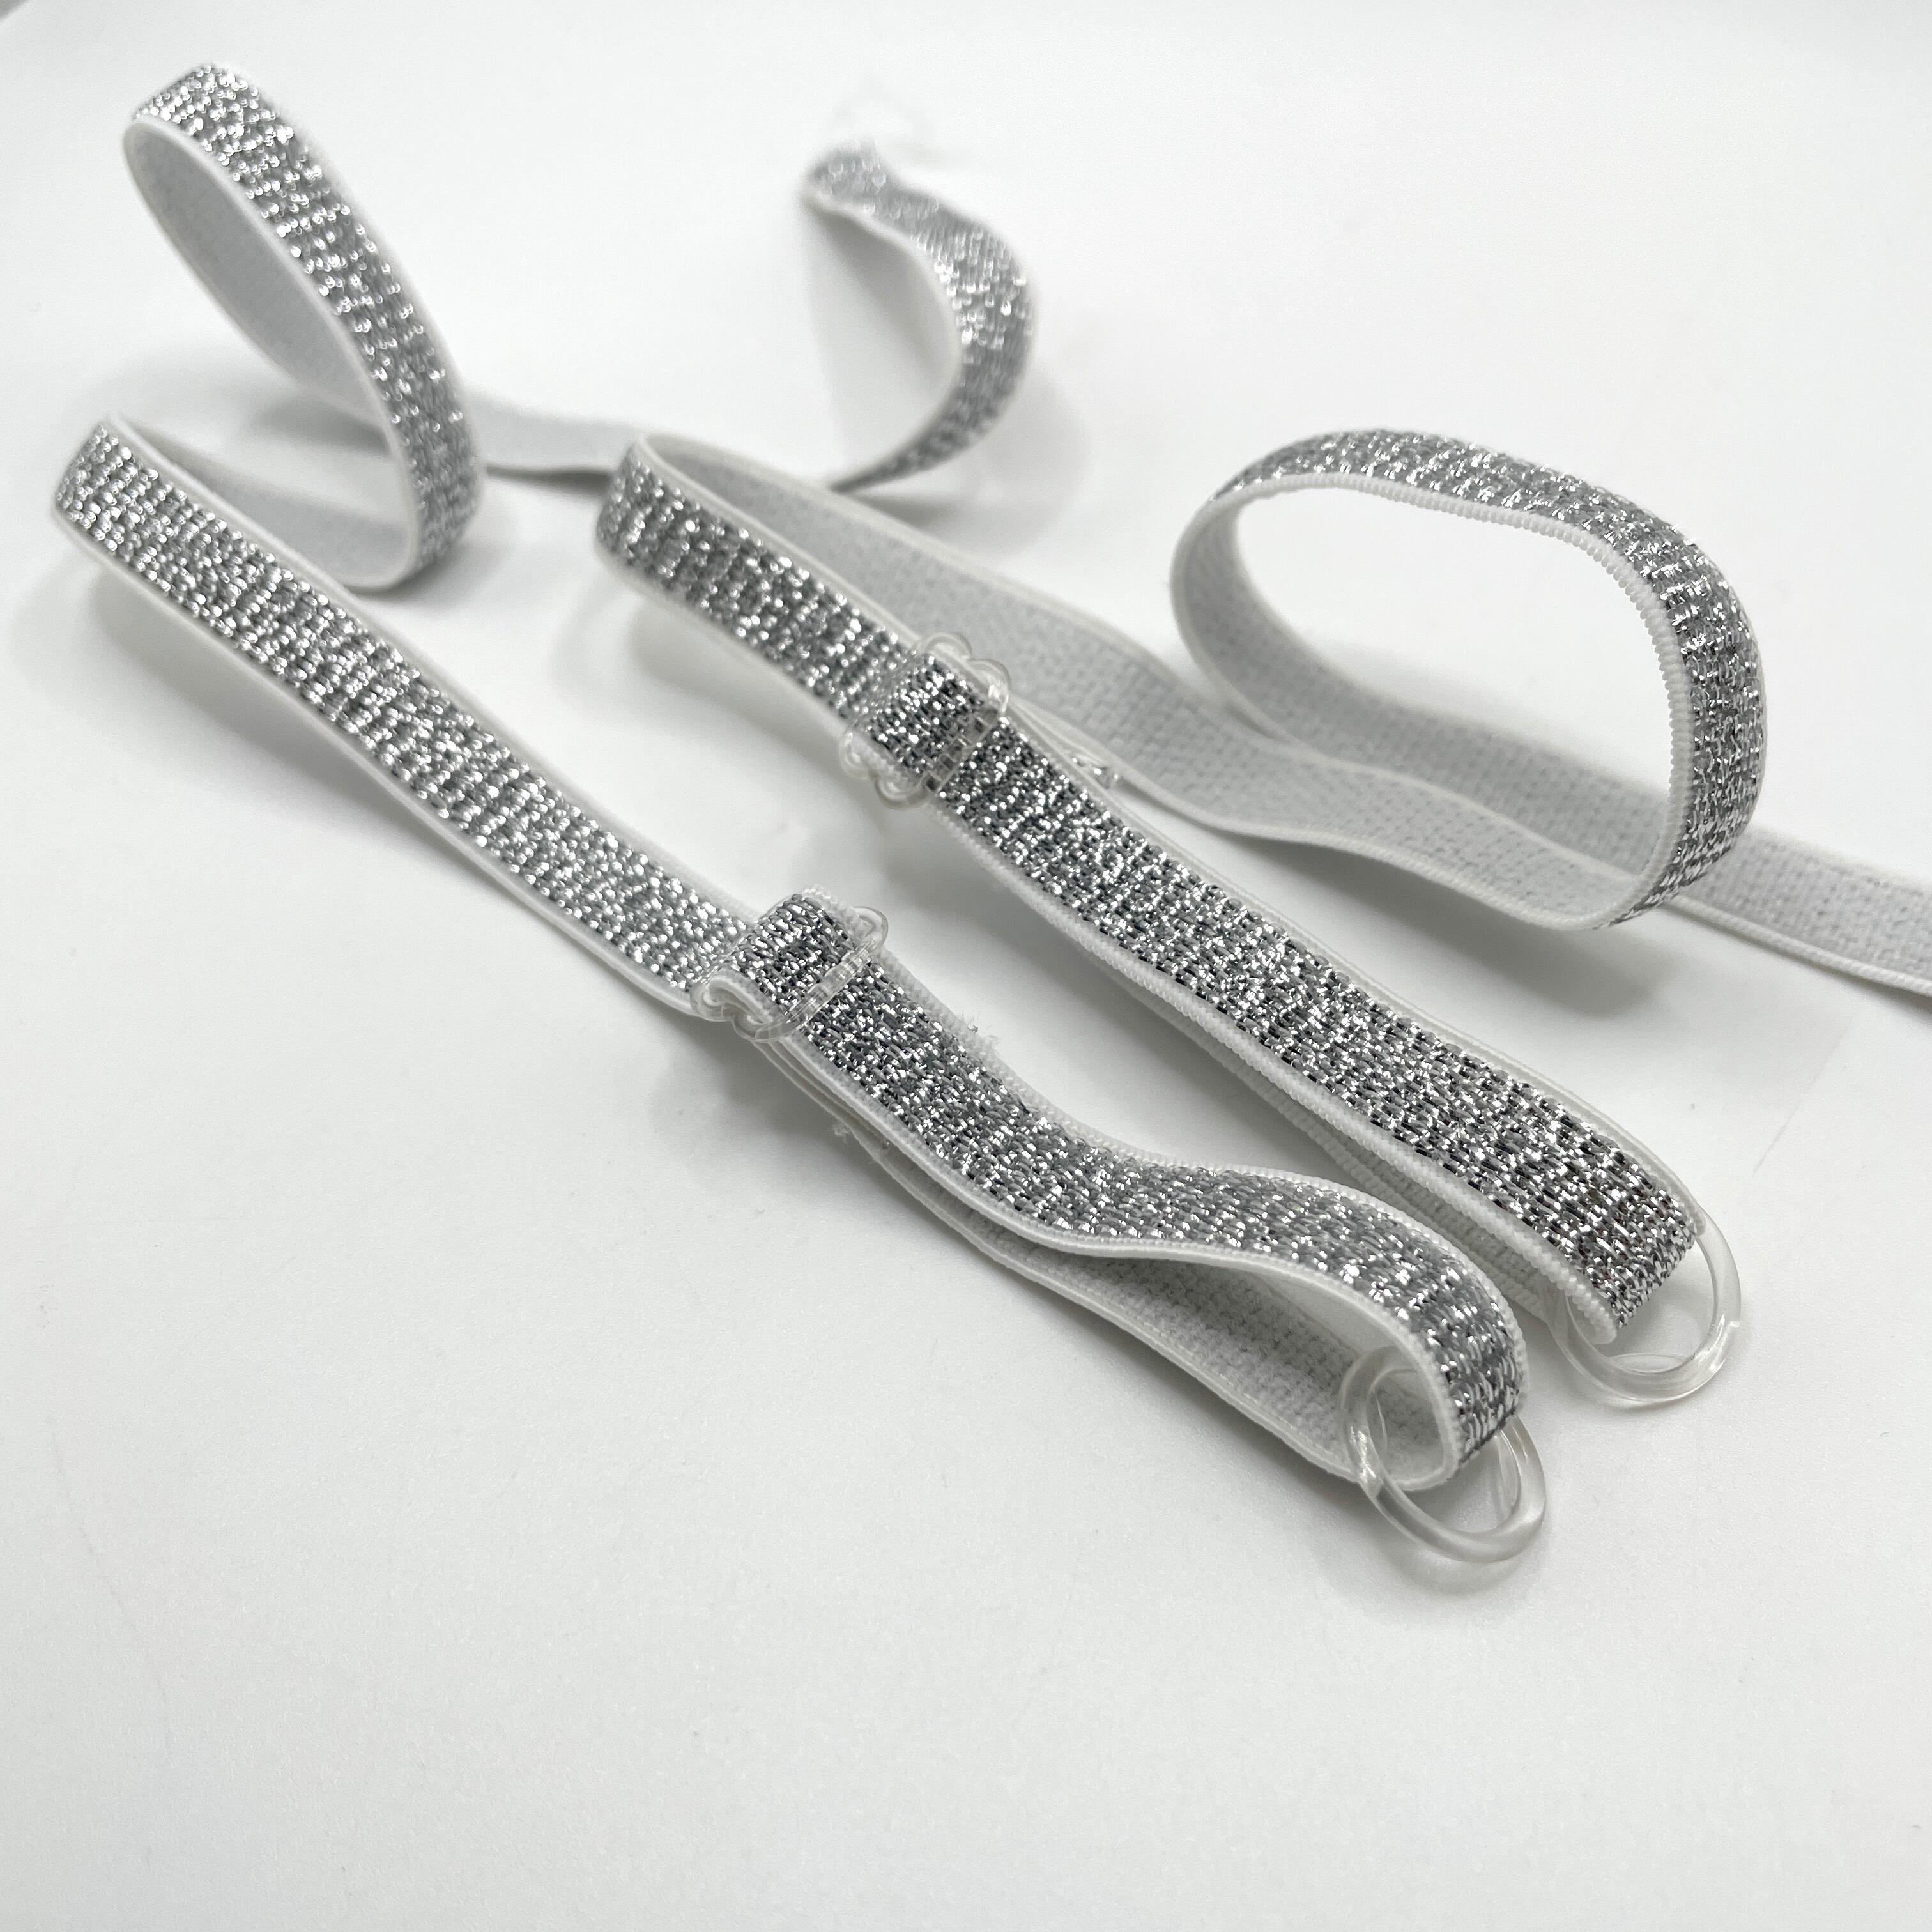 Porcelynne Silver Metal Alloy Replacement Bra Strap Slide Hook - 3/4  (19mm) Opening - 20 (20 Pieces)